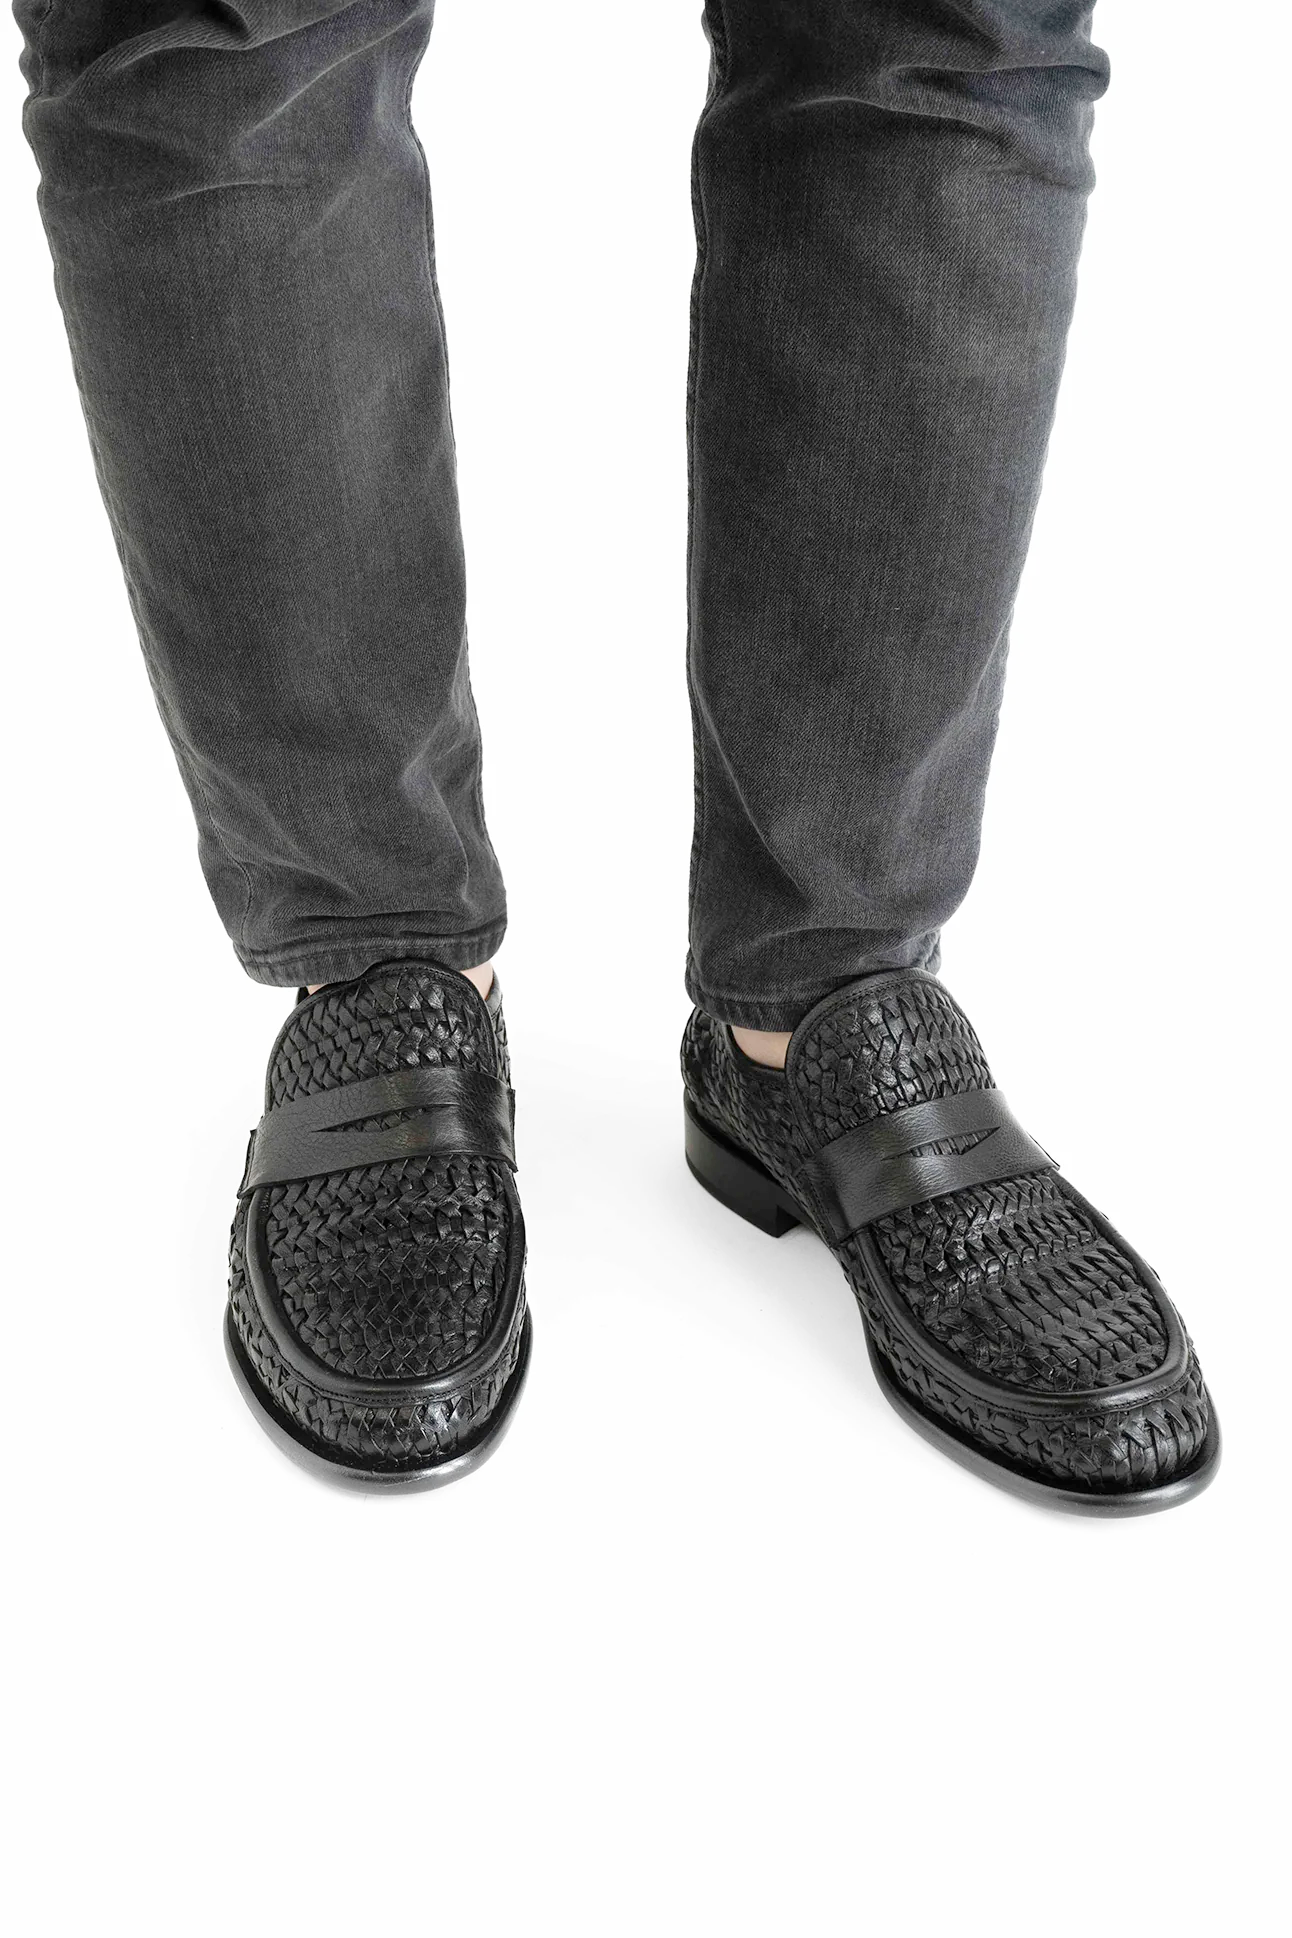 Enrico loafers, black leather